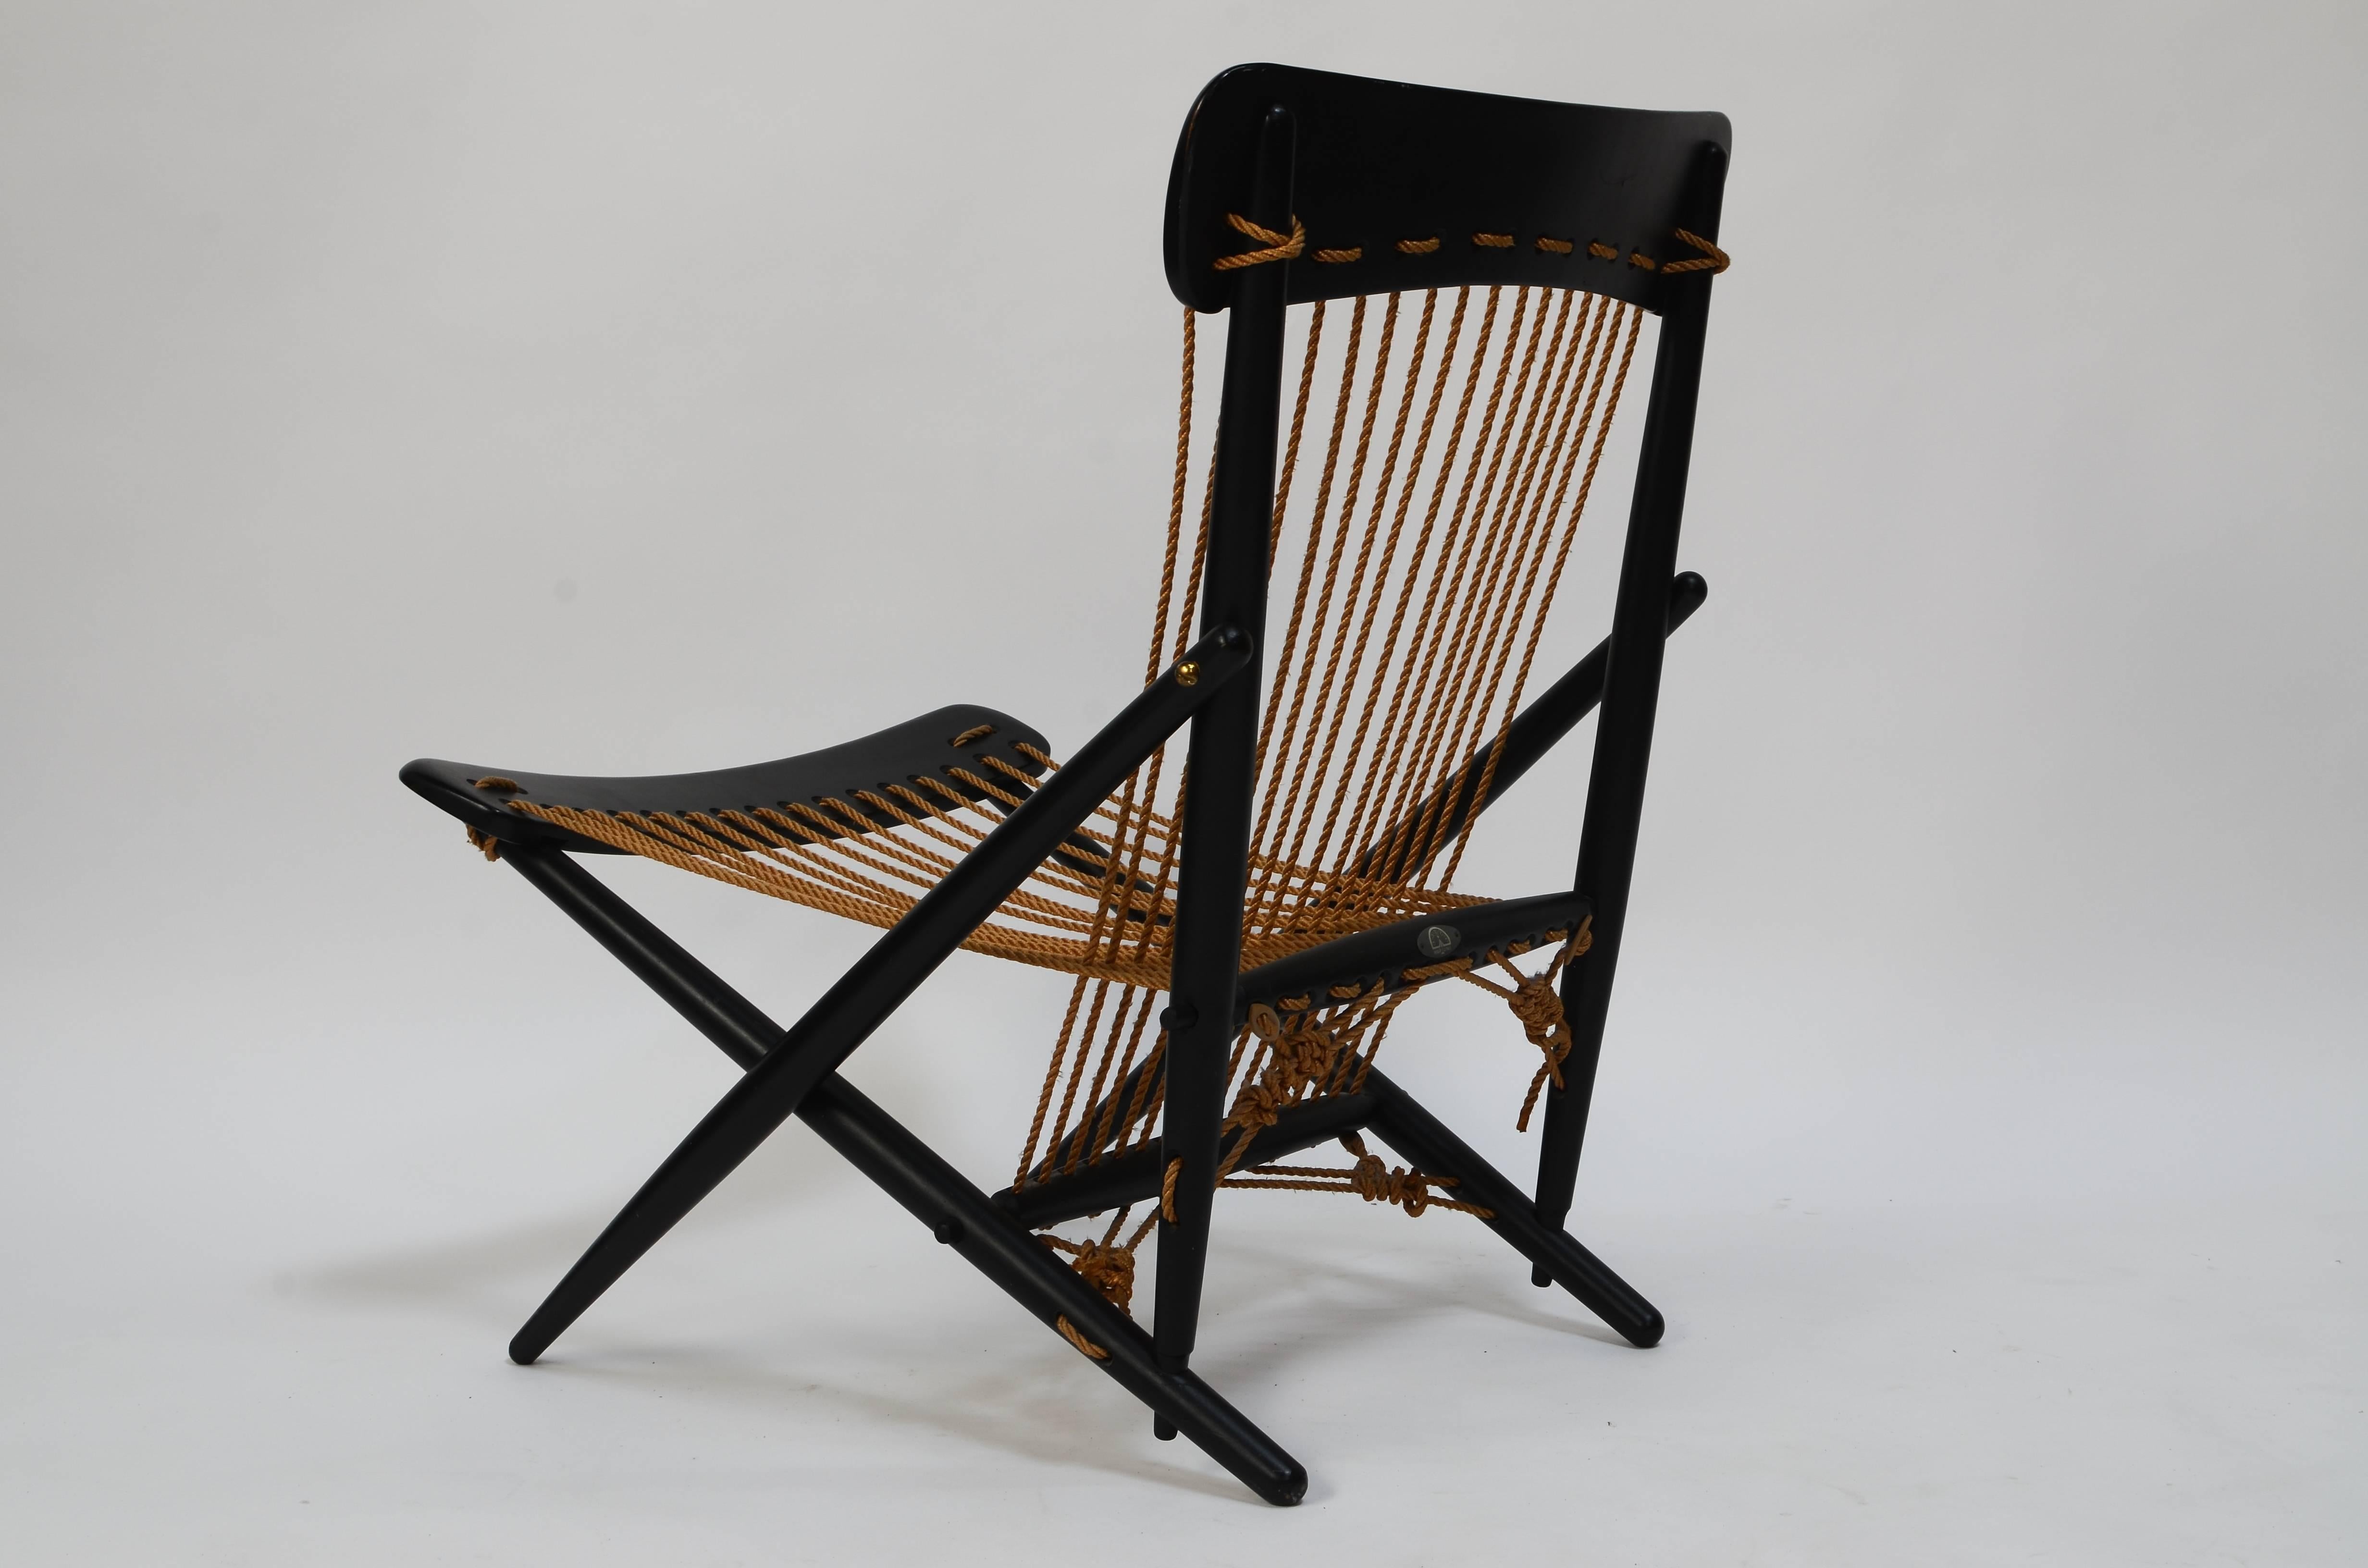 Lacquered Exquisite Japanese Rope Lounge Chair by Maruni, 1955